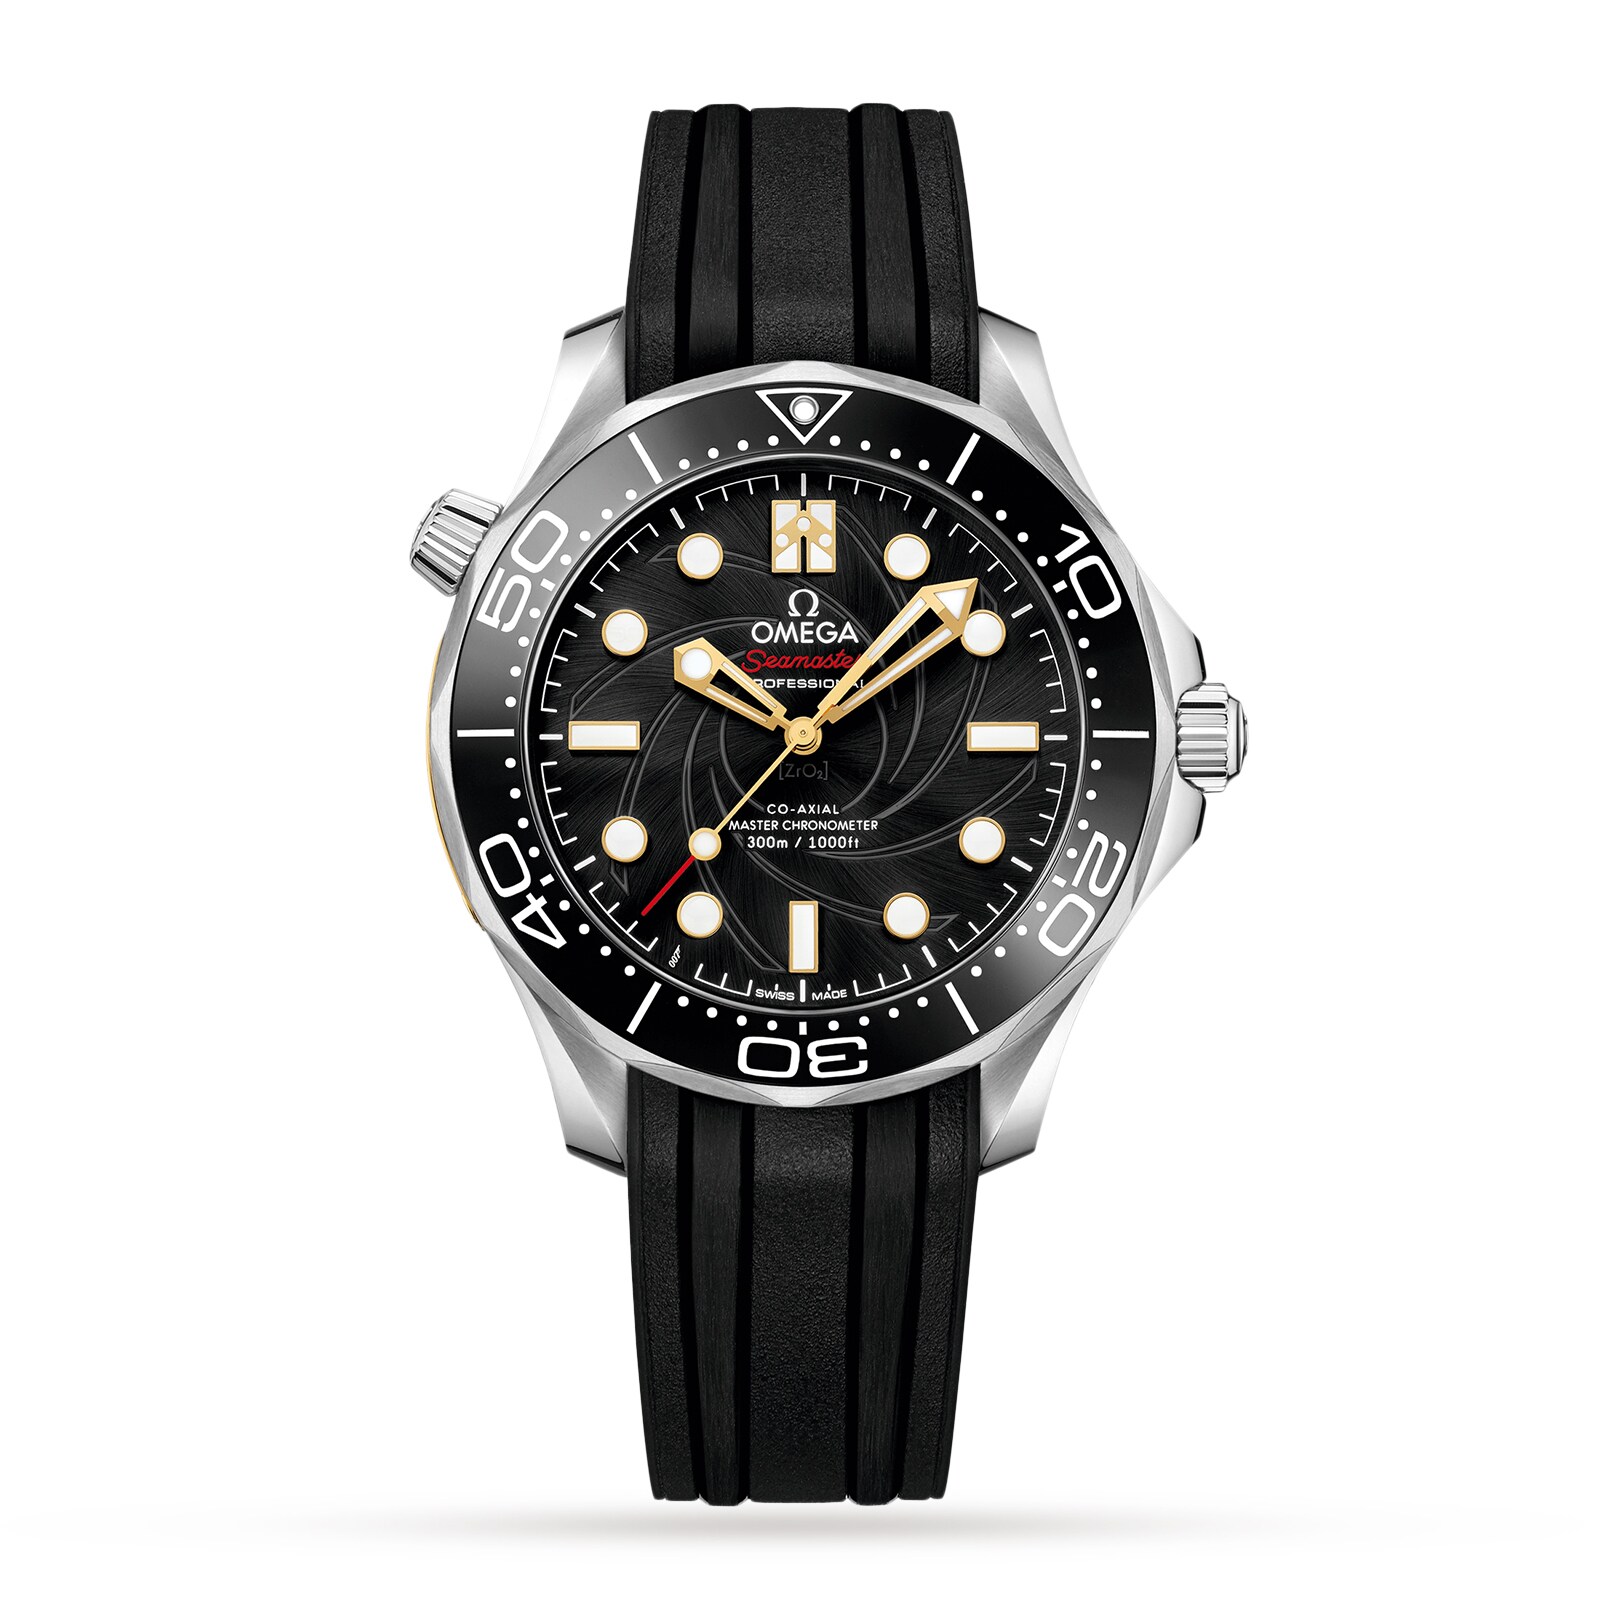 James Bond Limited Edition Set Diver 300M Co-Axial Master Chronometer 42mm